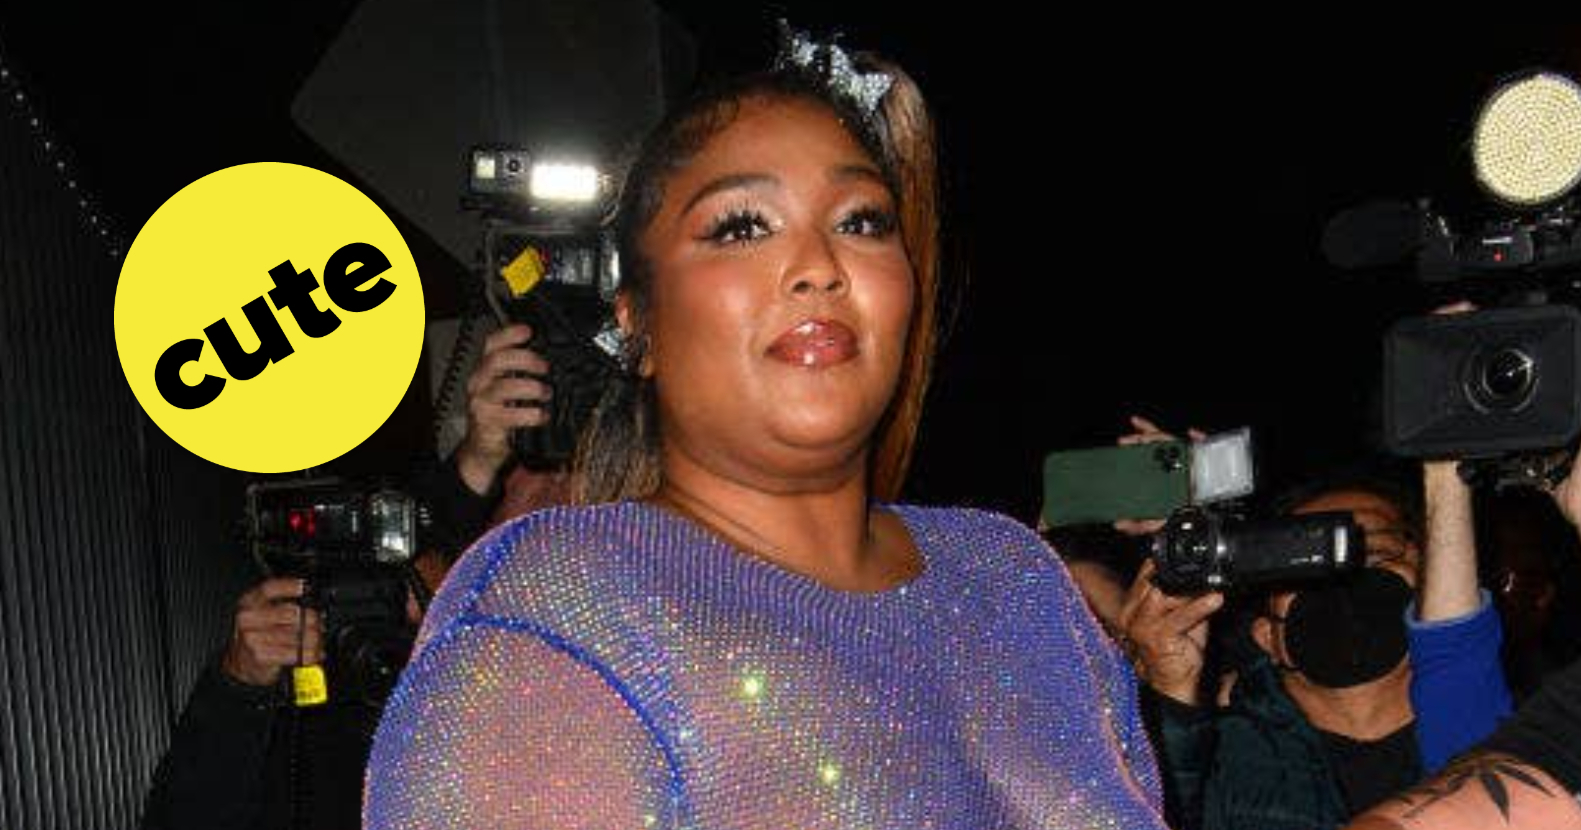 Lizzo wears see-through dress to Cardi B's party and fans are loving it